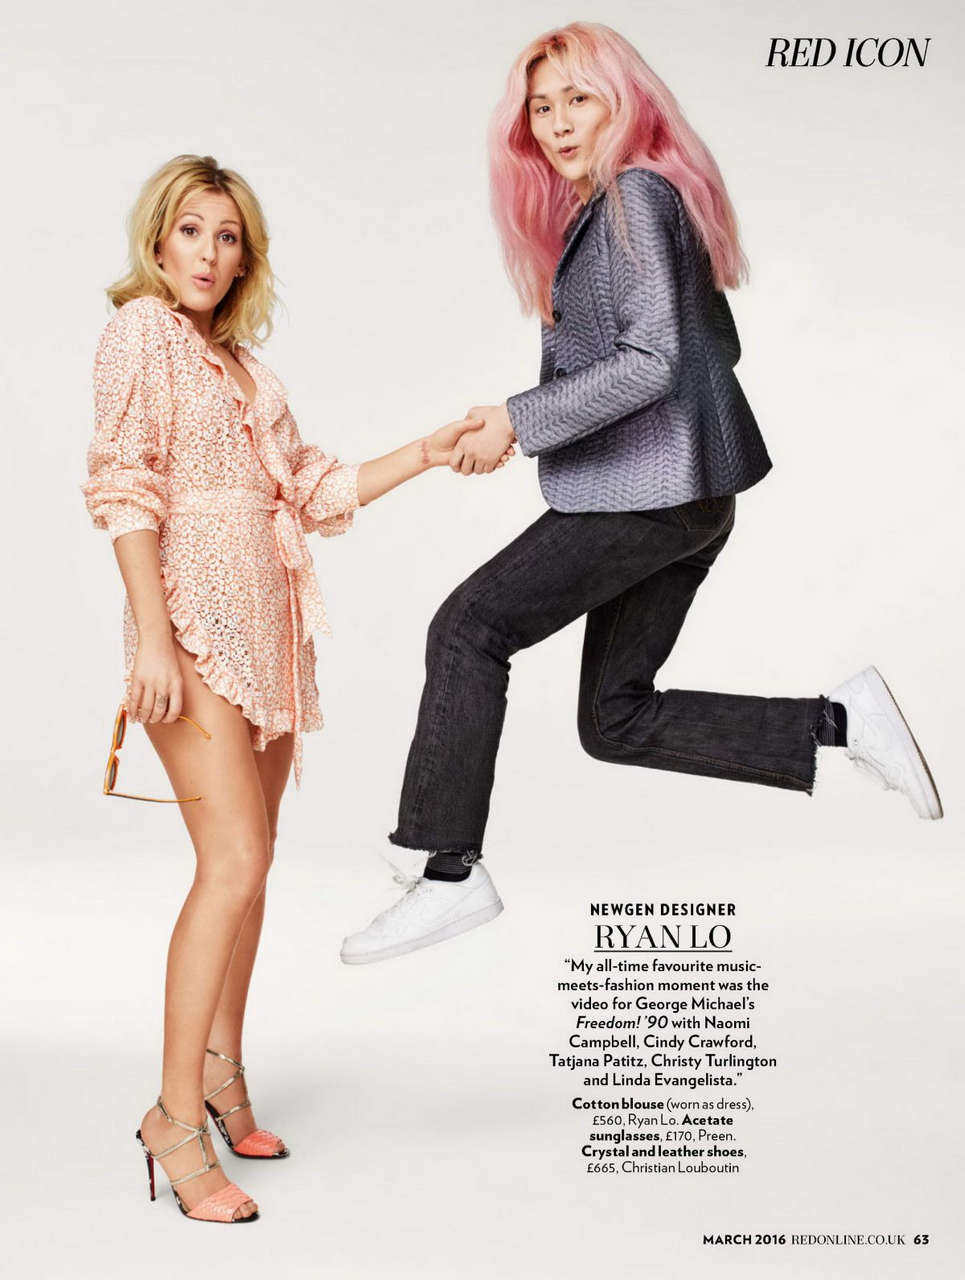 Ellie Goulding Red Magazine March 2016 Issue